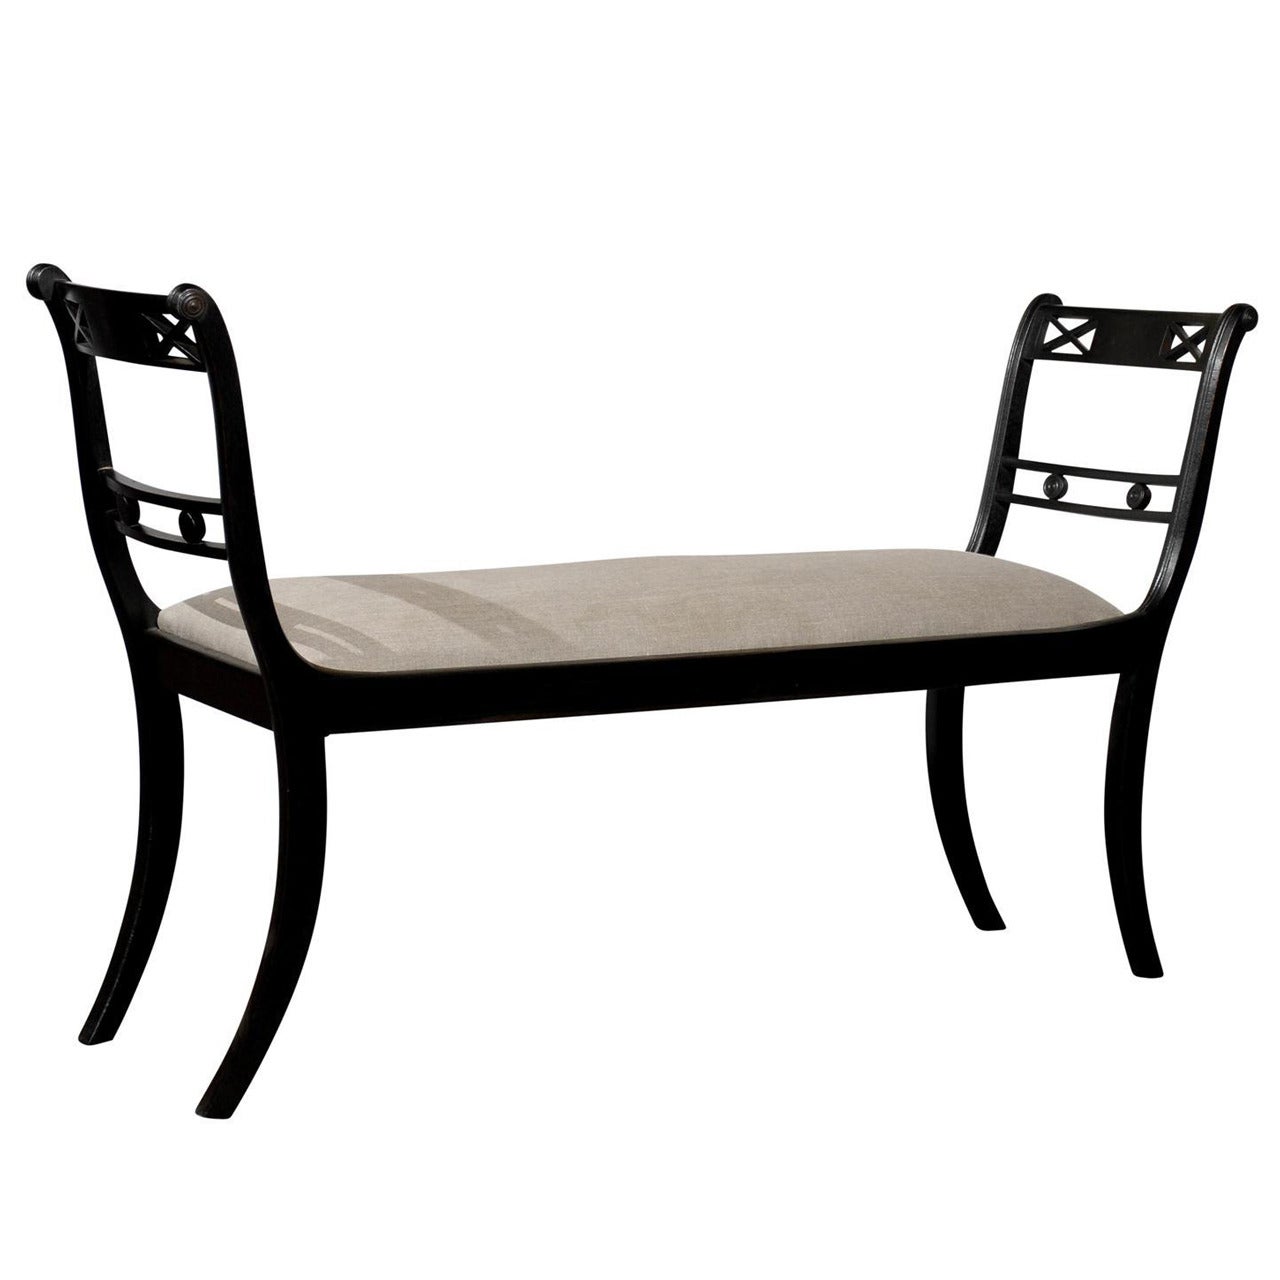 English Empire Style Ebonized Sleigh Bench with Upholstered Seat, circa 1900